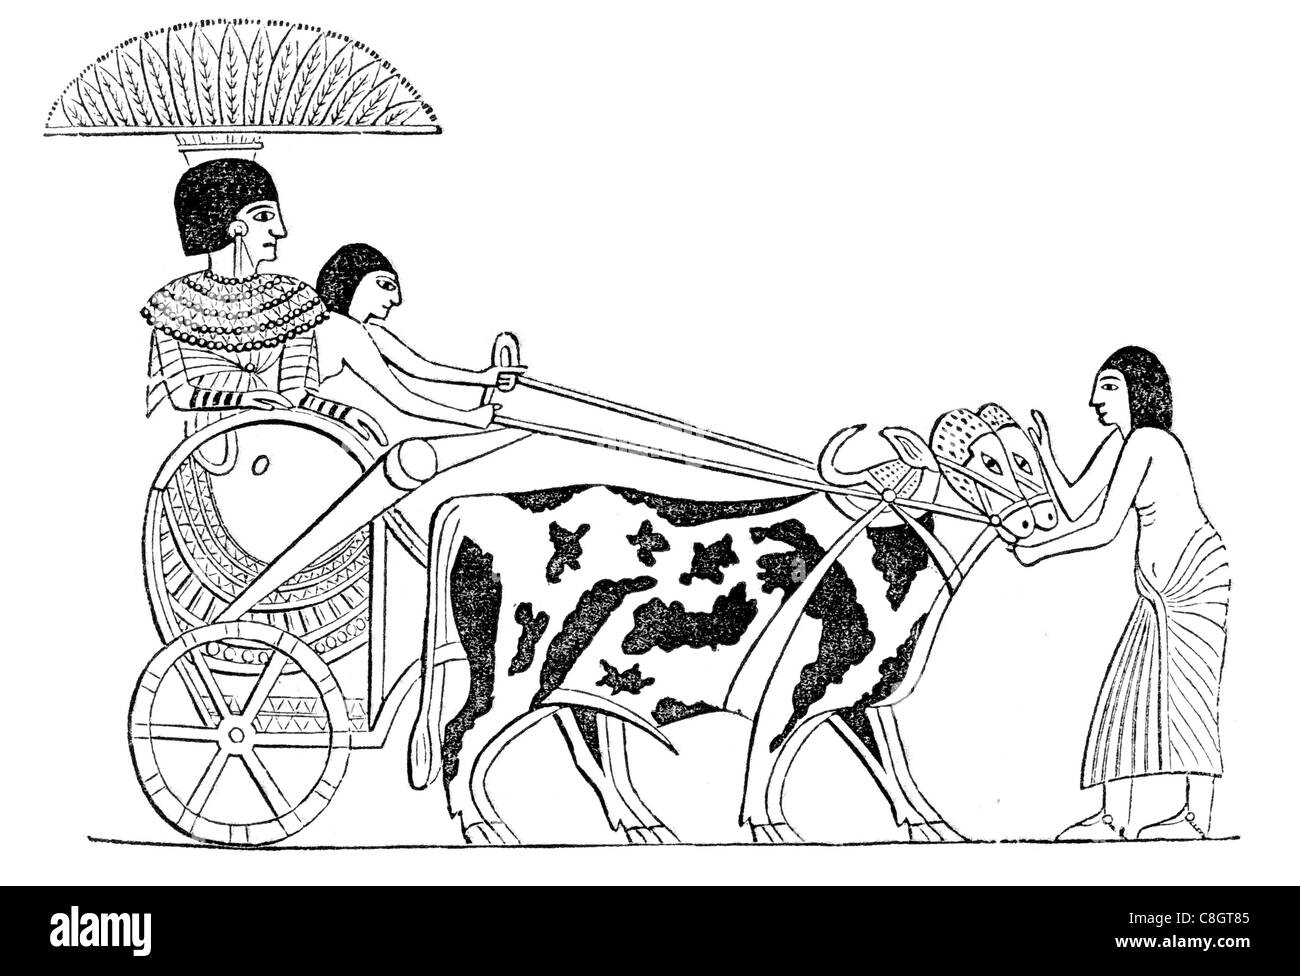 Car Chariots chariot ancient Egyptian society chariotry King’s military force weapon Egypt Hyksos Oxen cow cattle horned Stock Photo